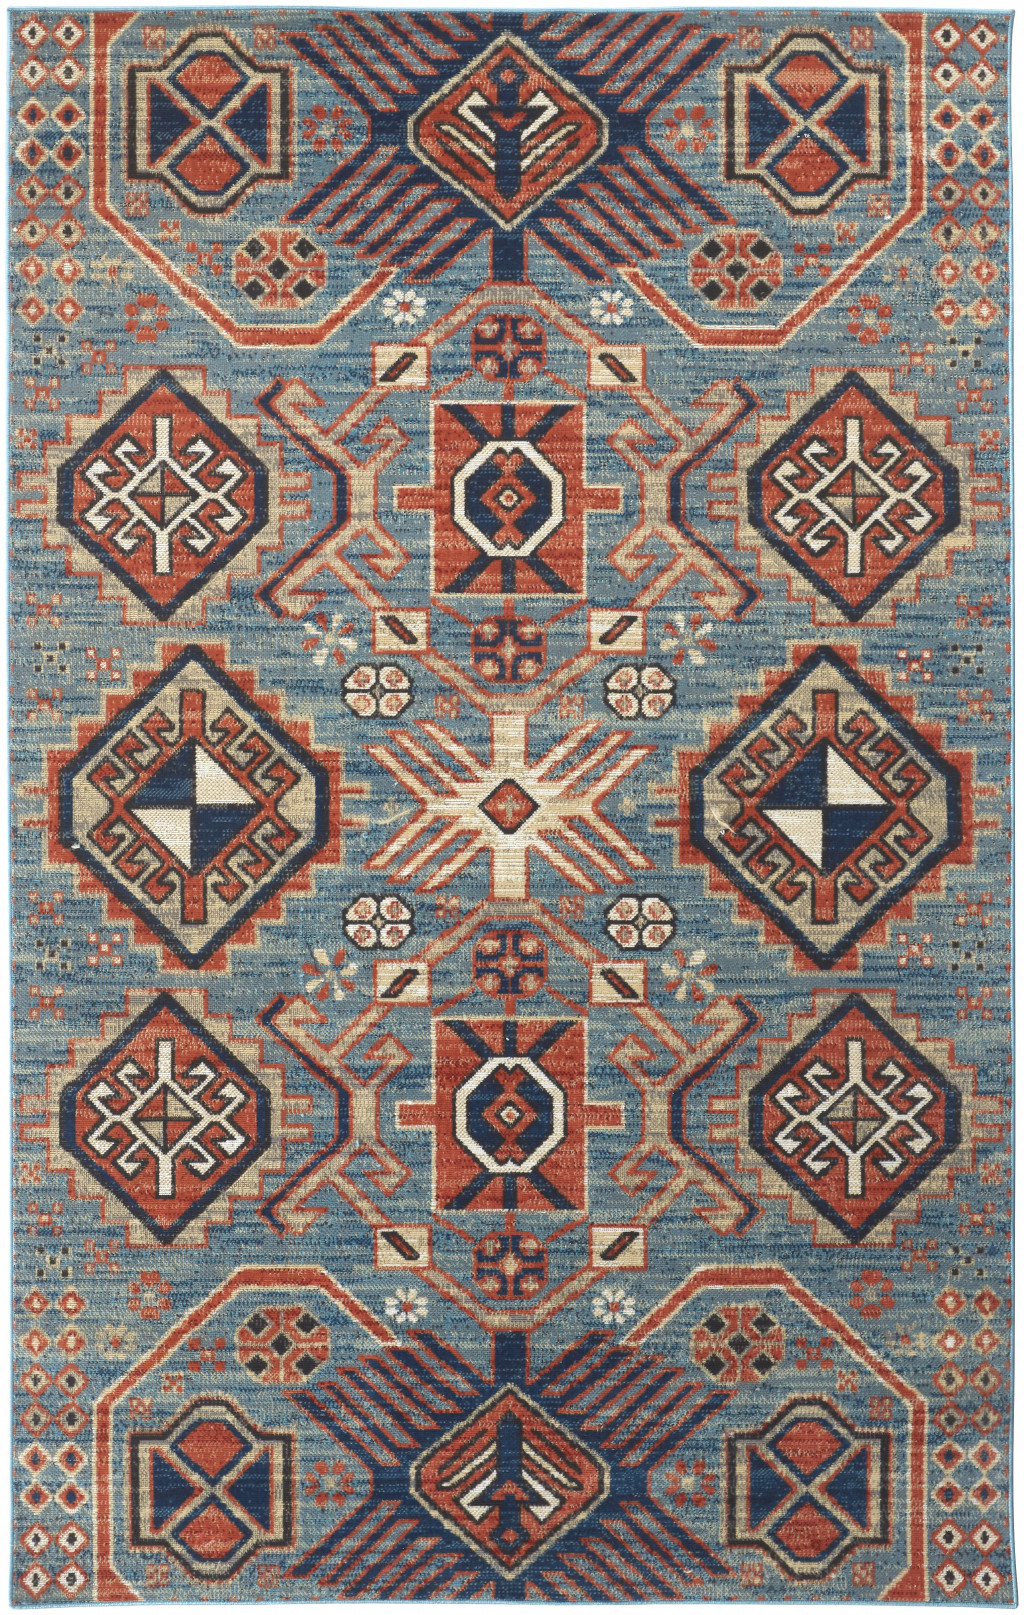 8' X 11' Blue Red And Tan Abstract Power Loom Distressed Stain Resistant Area Rug-514655-1